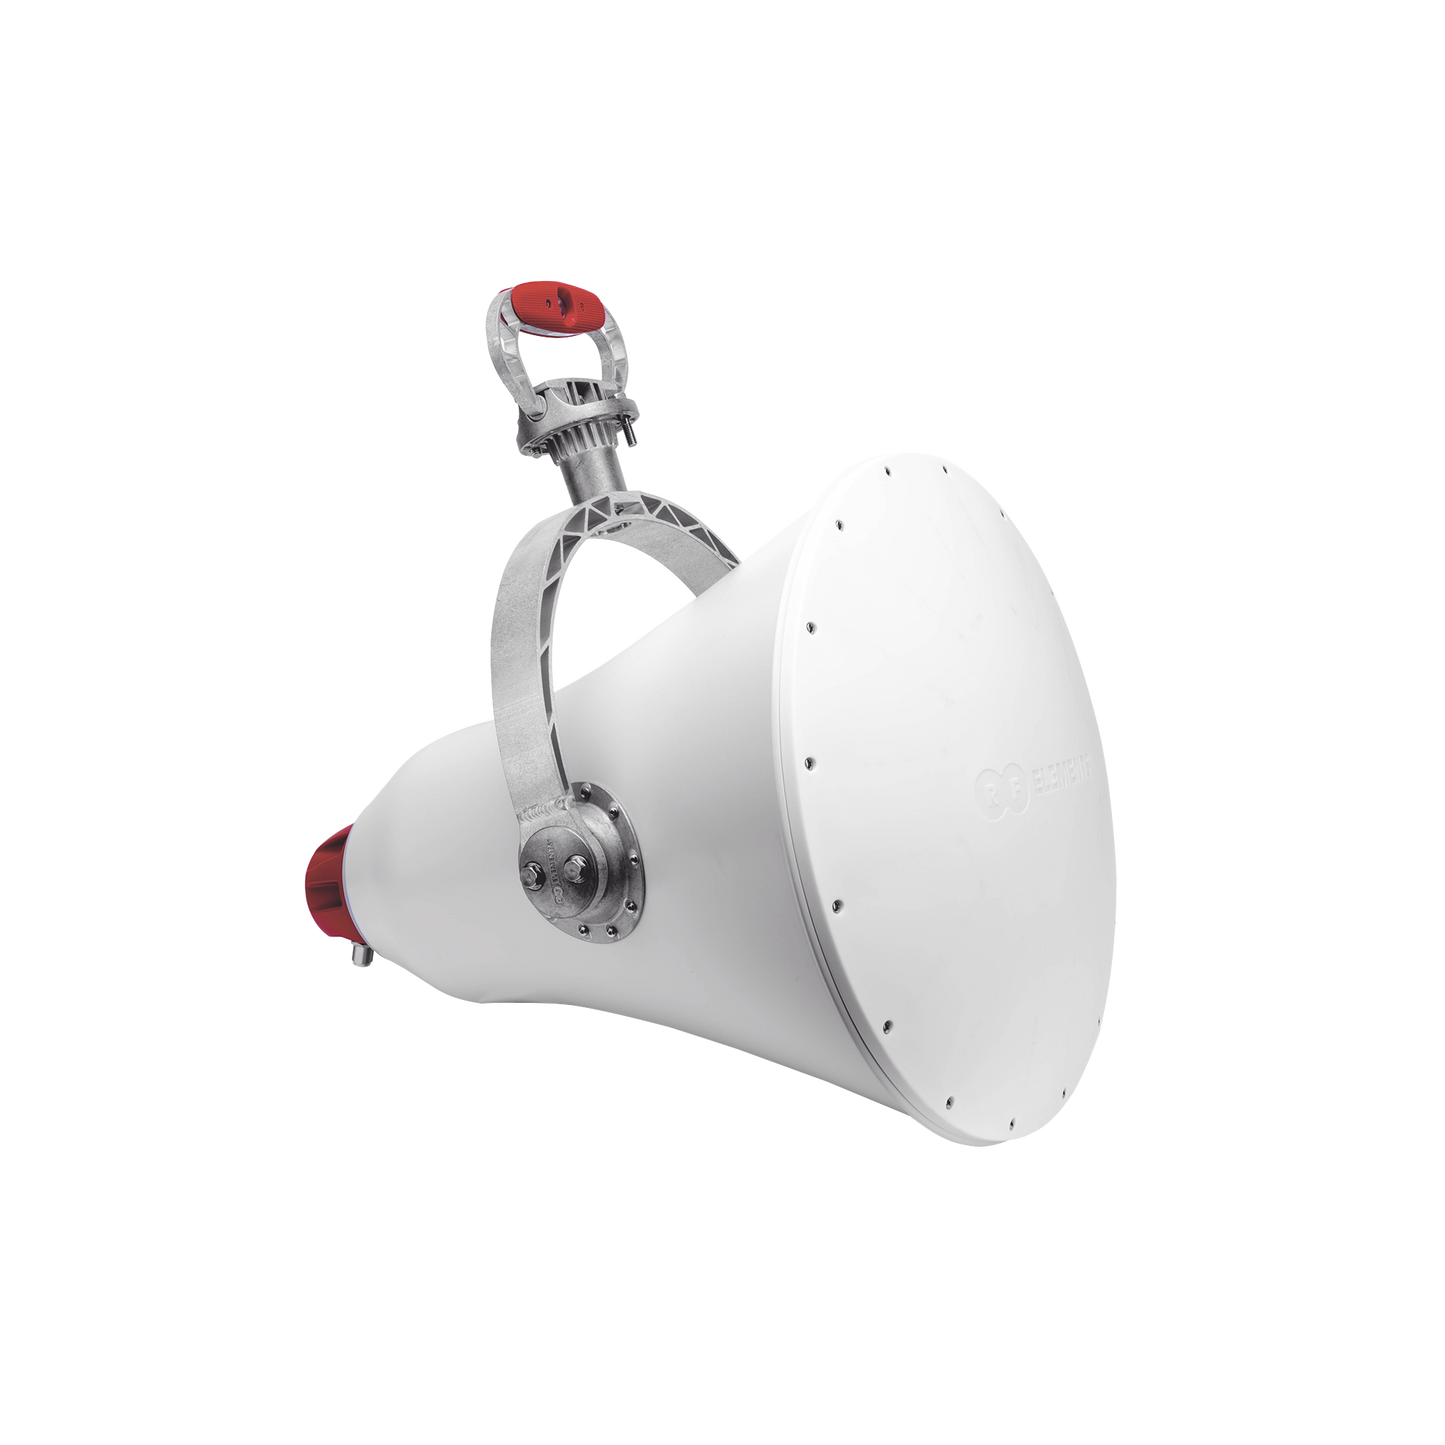 Directional Antenna UltraHorn™ Carrier Class, 5180-6775 GHz GHz, 24 dBi, Ultimate Noise Rejection, Highly Directive without Side Lobes